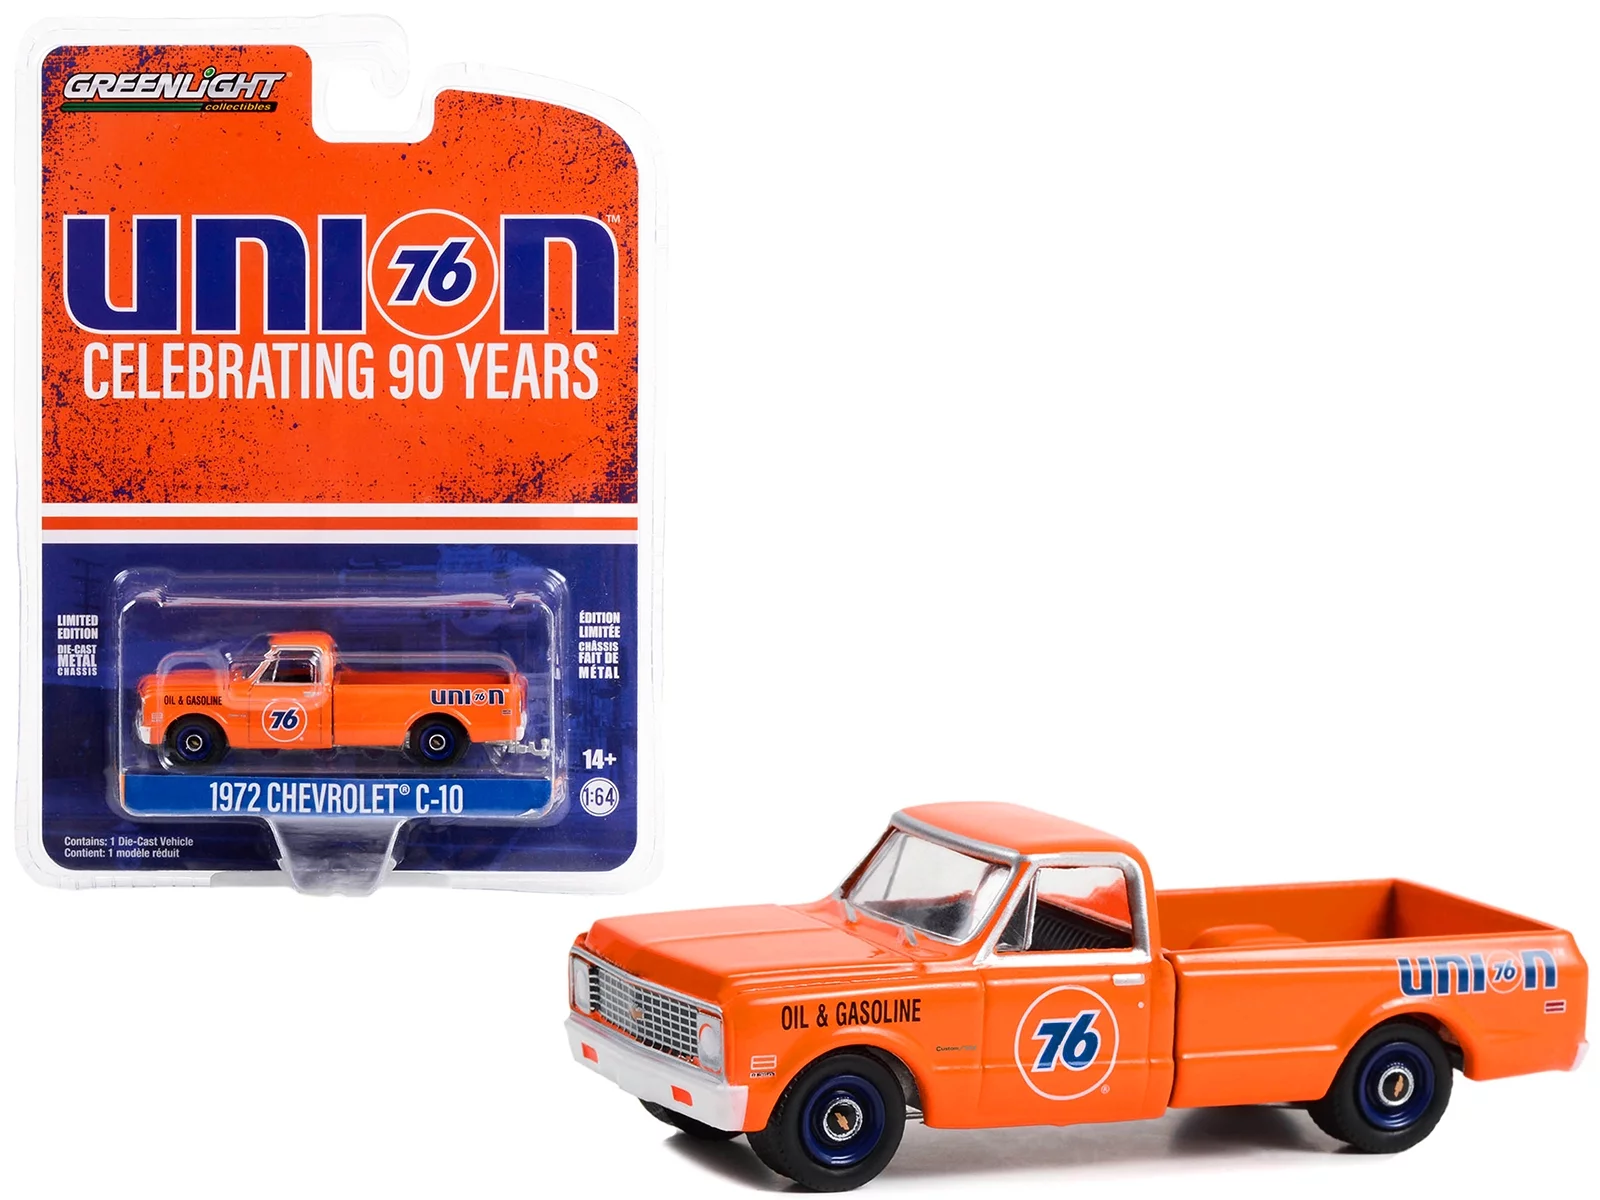 Greenlight 1:64 Anniversary Collection Series 15 - 1972 Chevrolet C-10 - Union 76 Oil & Gasoline - Union 76 Celebrating 90 Years Solid Pack 28120-C